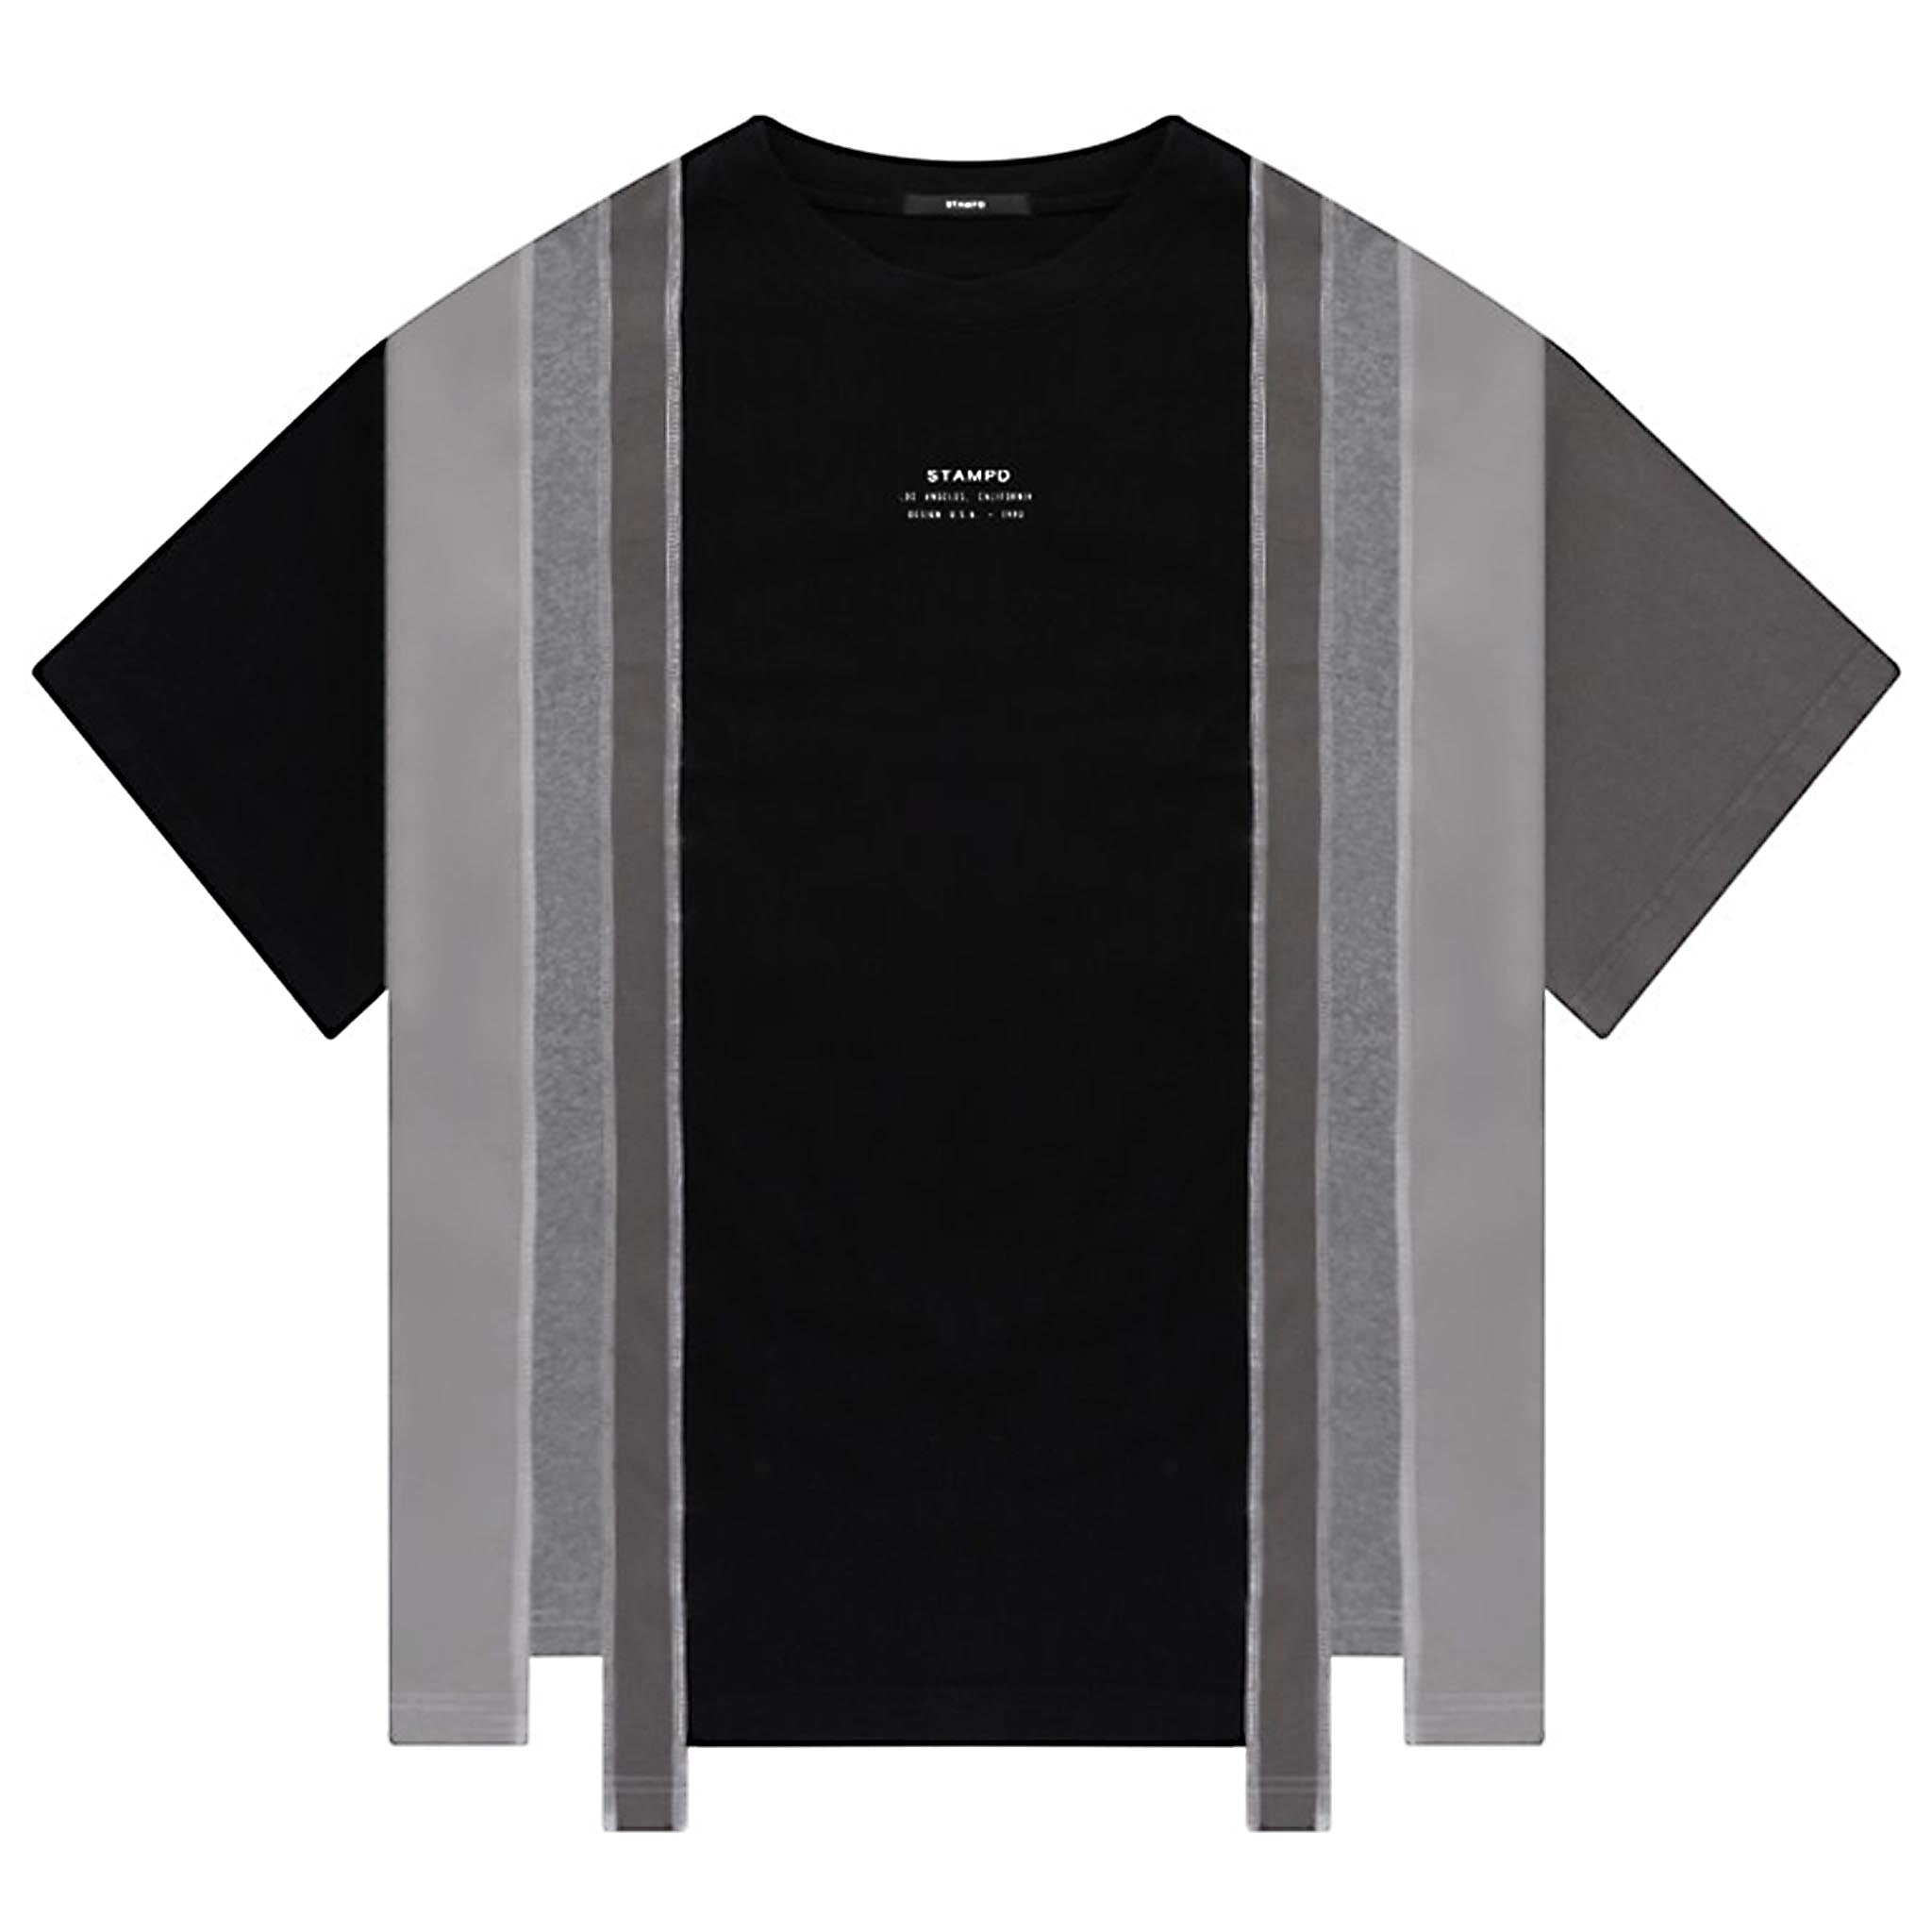 STAMPD Reconstructed Tee Black